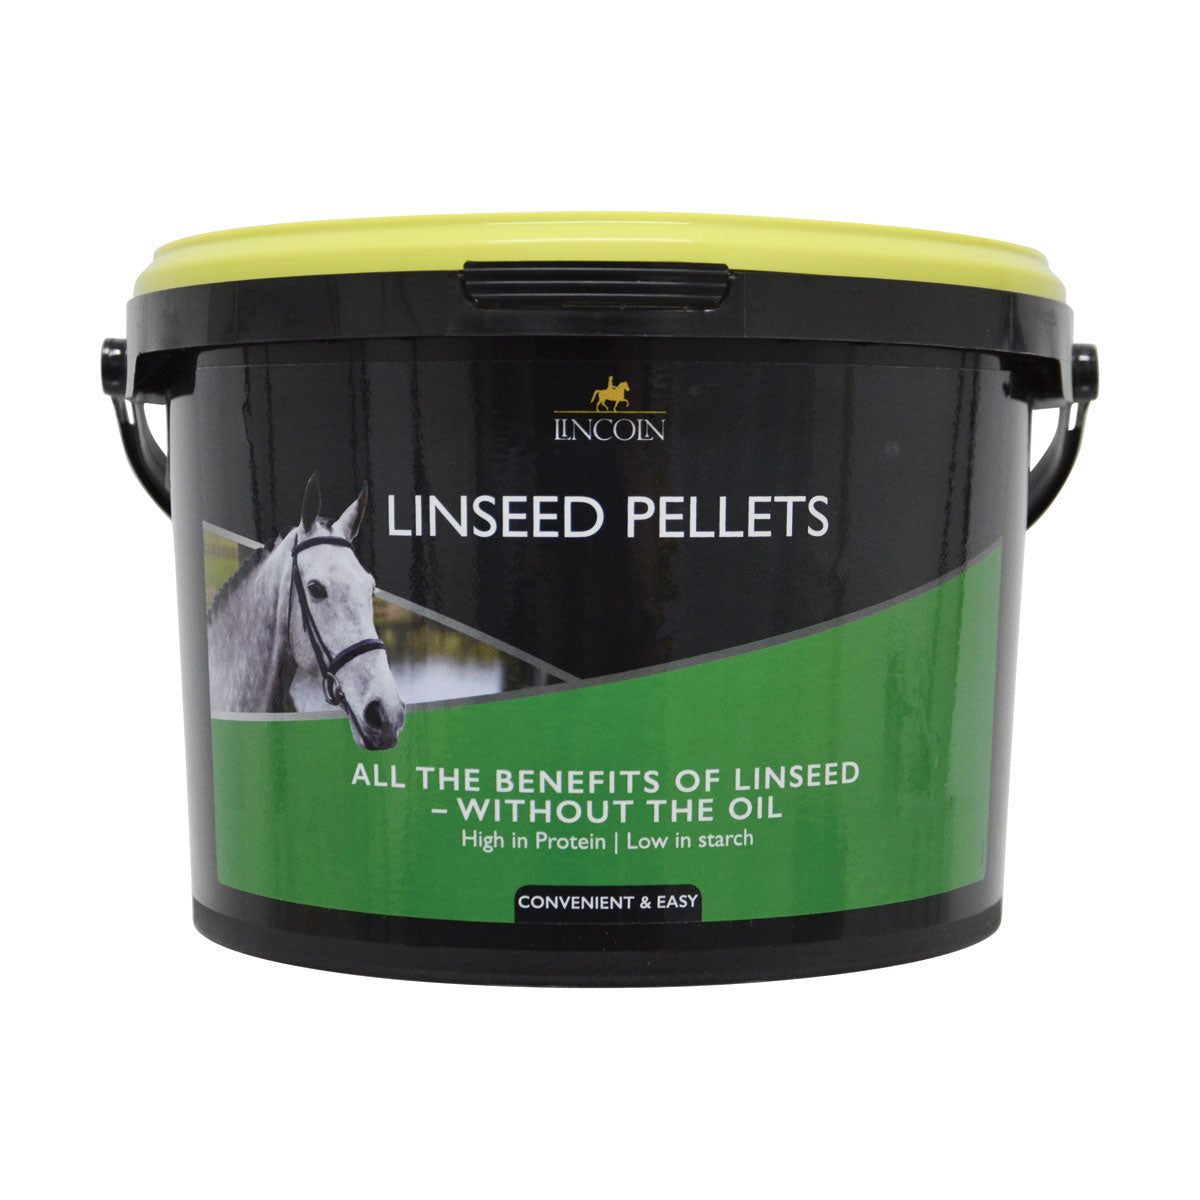 Lincoln Linseed Pellets